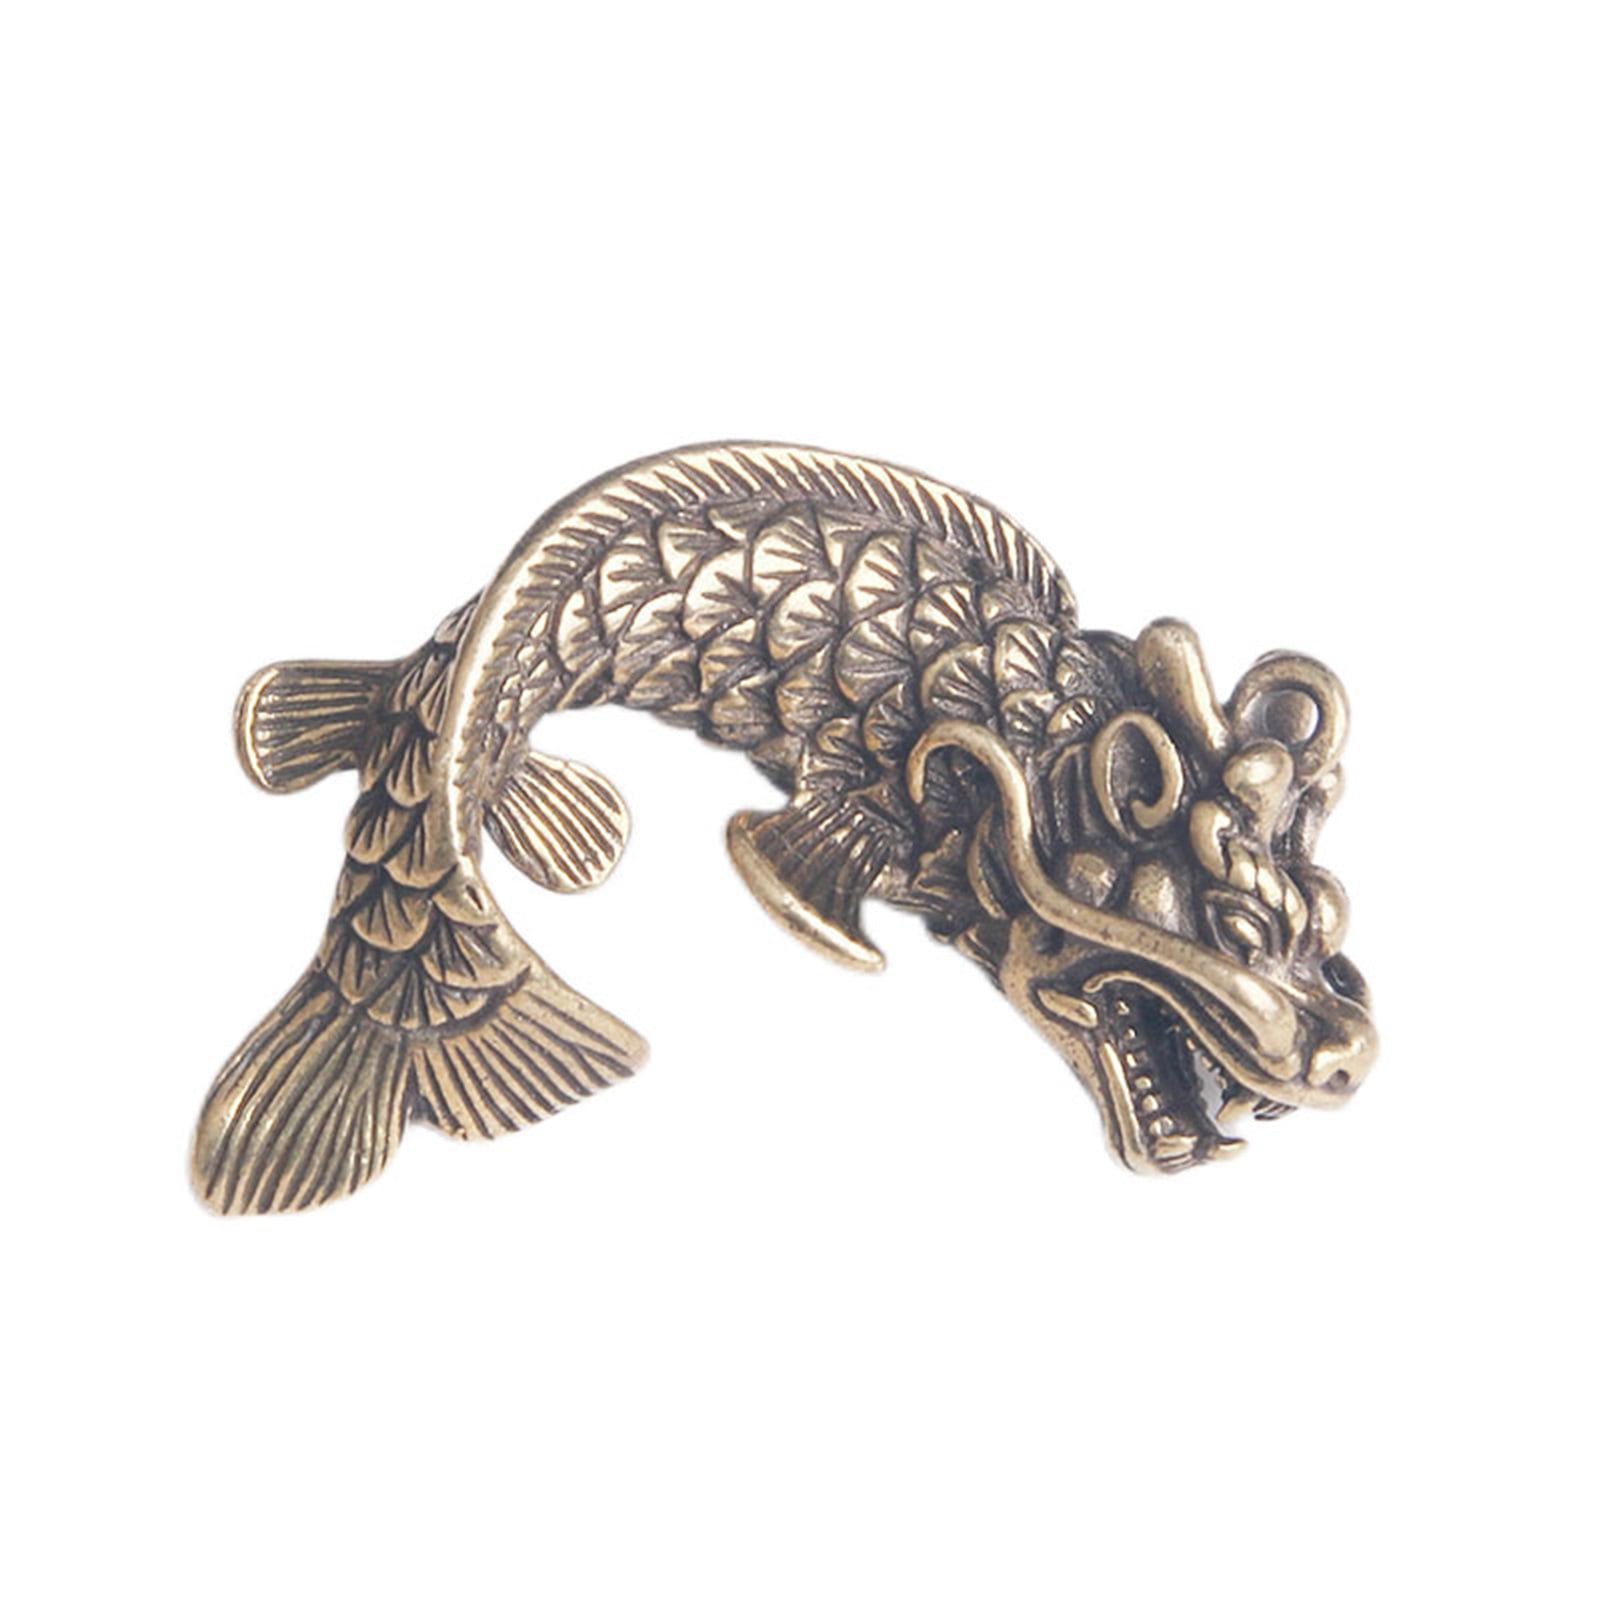 Frogued Artistic Sophisticated Vividly Engraved Dragon Charm for 3D Copper Key Texture Fish Home Ornament